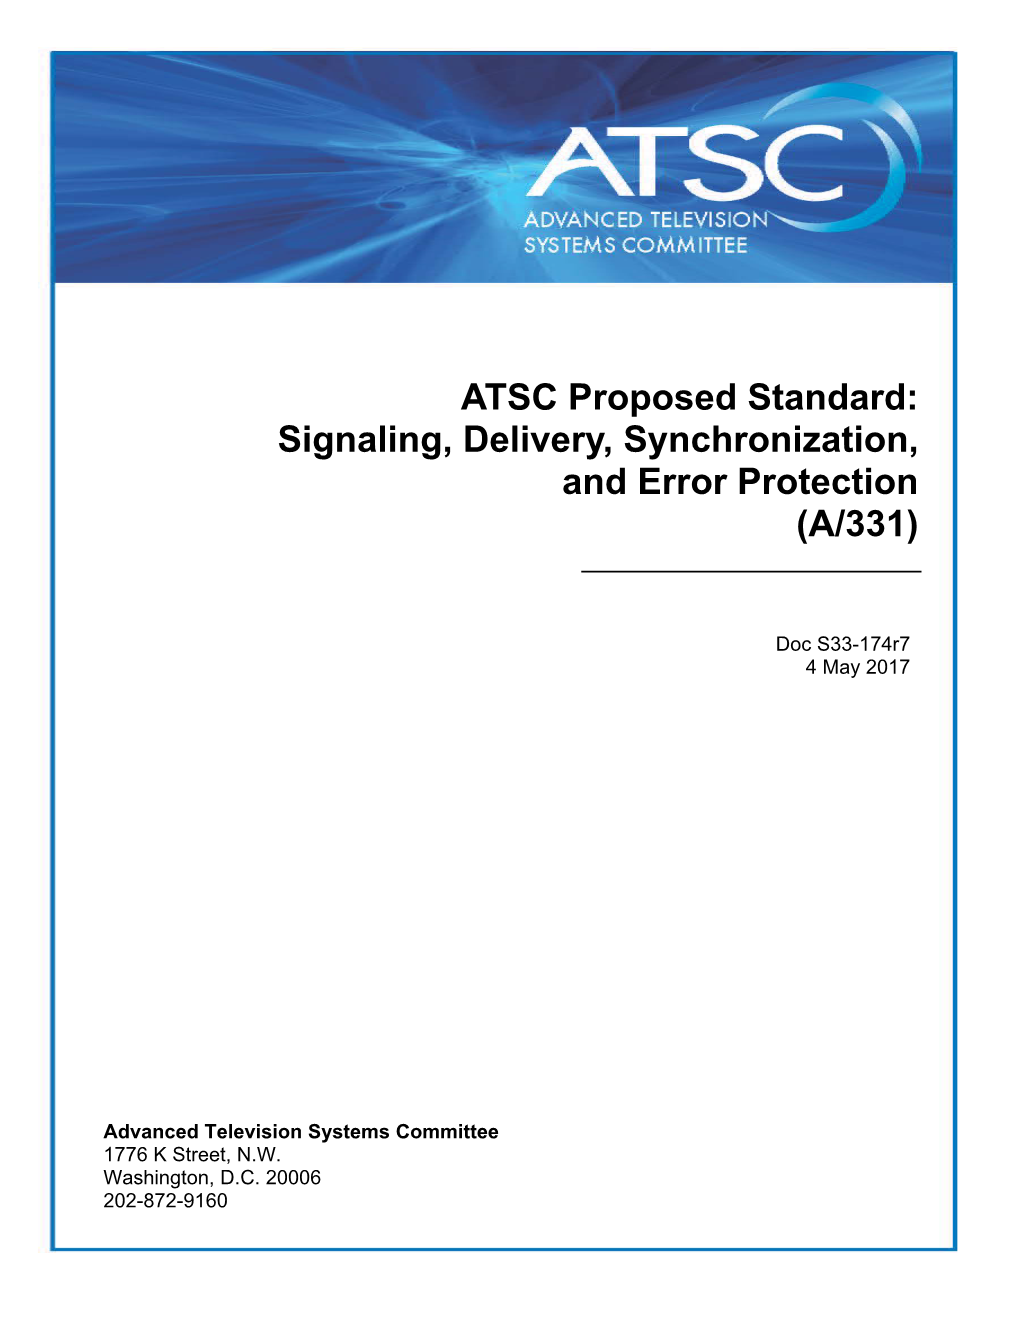 ATSC Proposed Standard: Signaling, Delivery, Synchronization, and Error Protection (A/331)